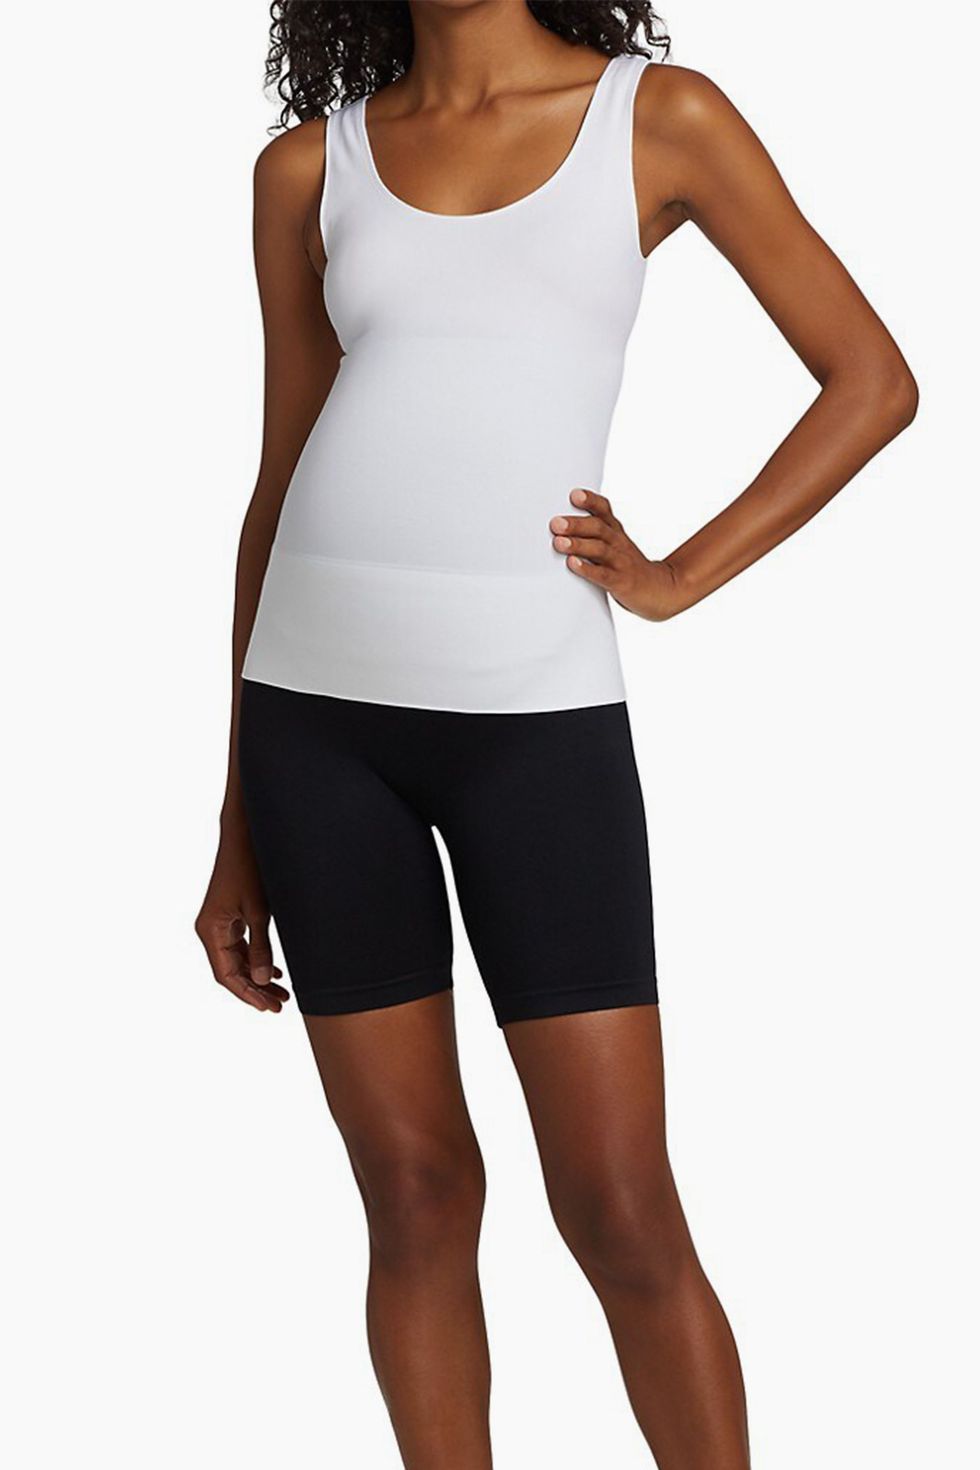 Mother Warmth Women Camisole - Buy Mother Warmth Women Camisole Online at  Best Prices in India